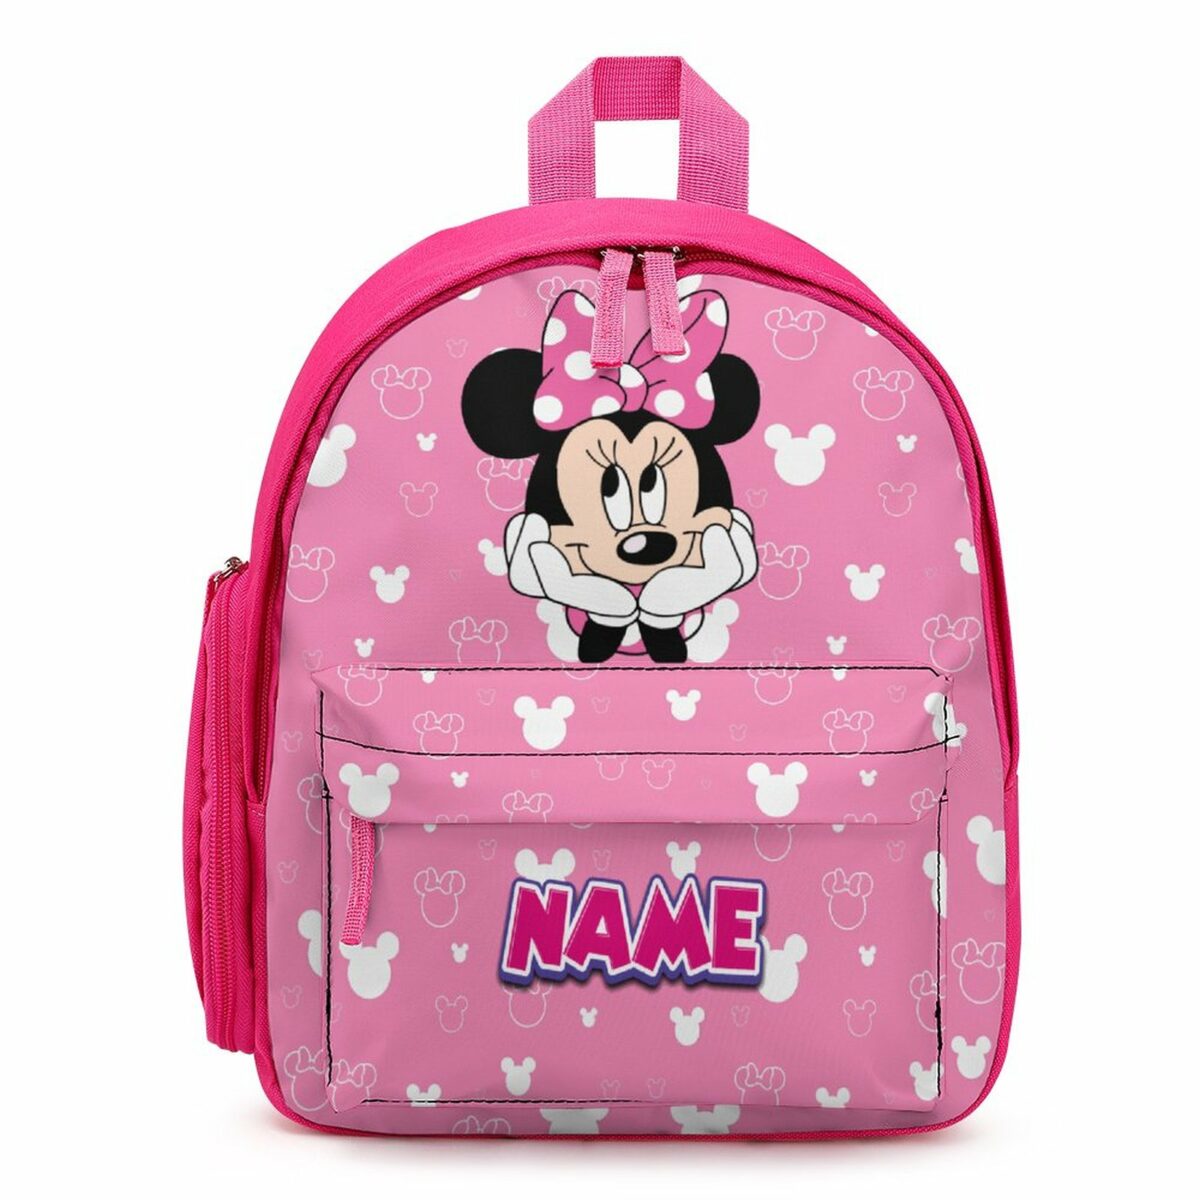 Personalized Minnie Mouse Children’s School Bag – Toddler’s Backpack Cool Kiddo 10